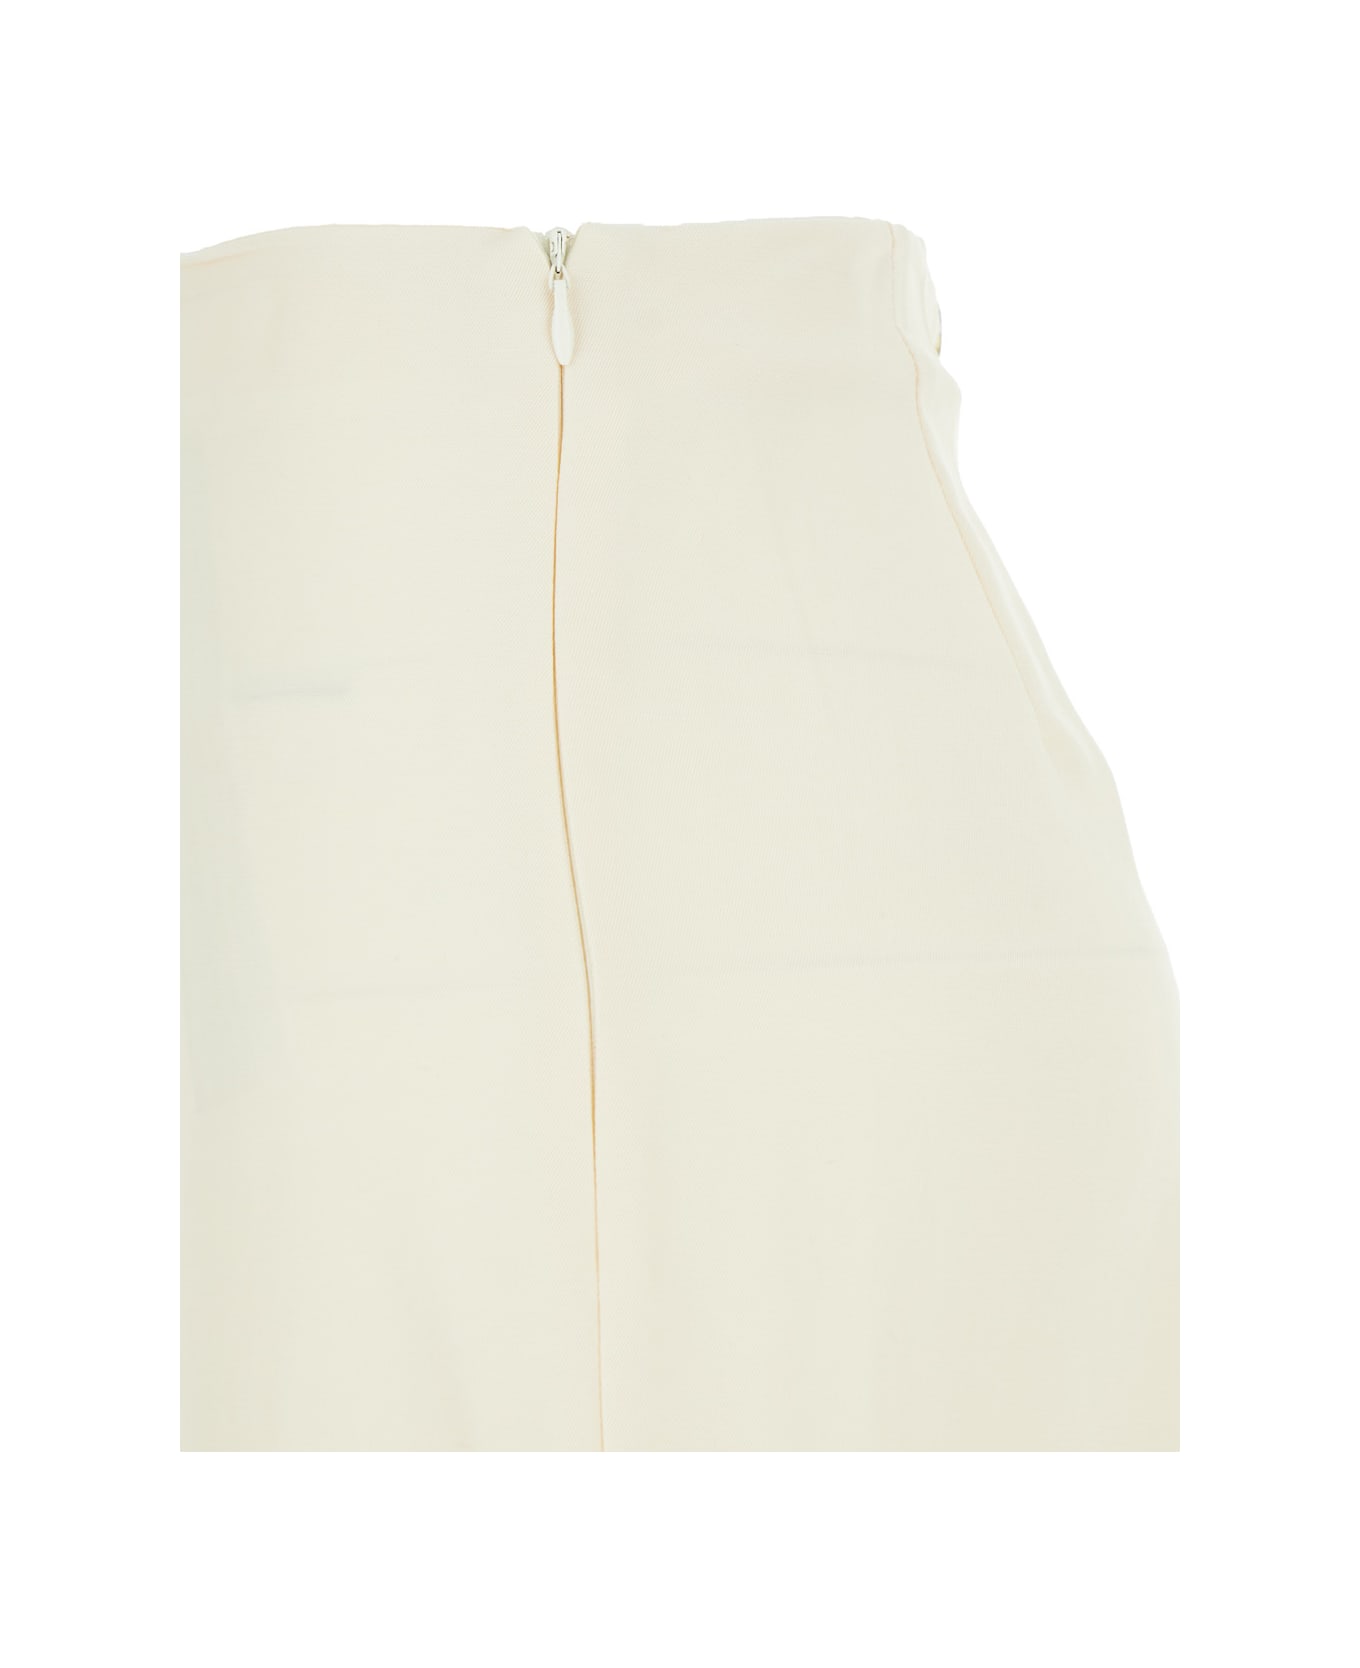 TwinSet White Flared Pants In Linen Blend Woman - White